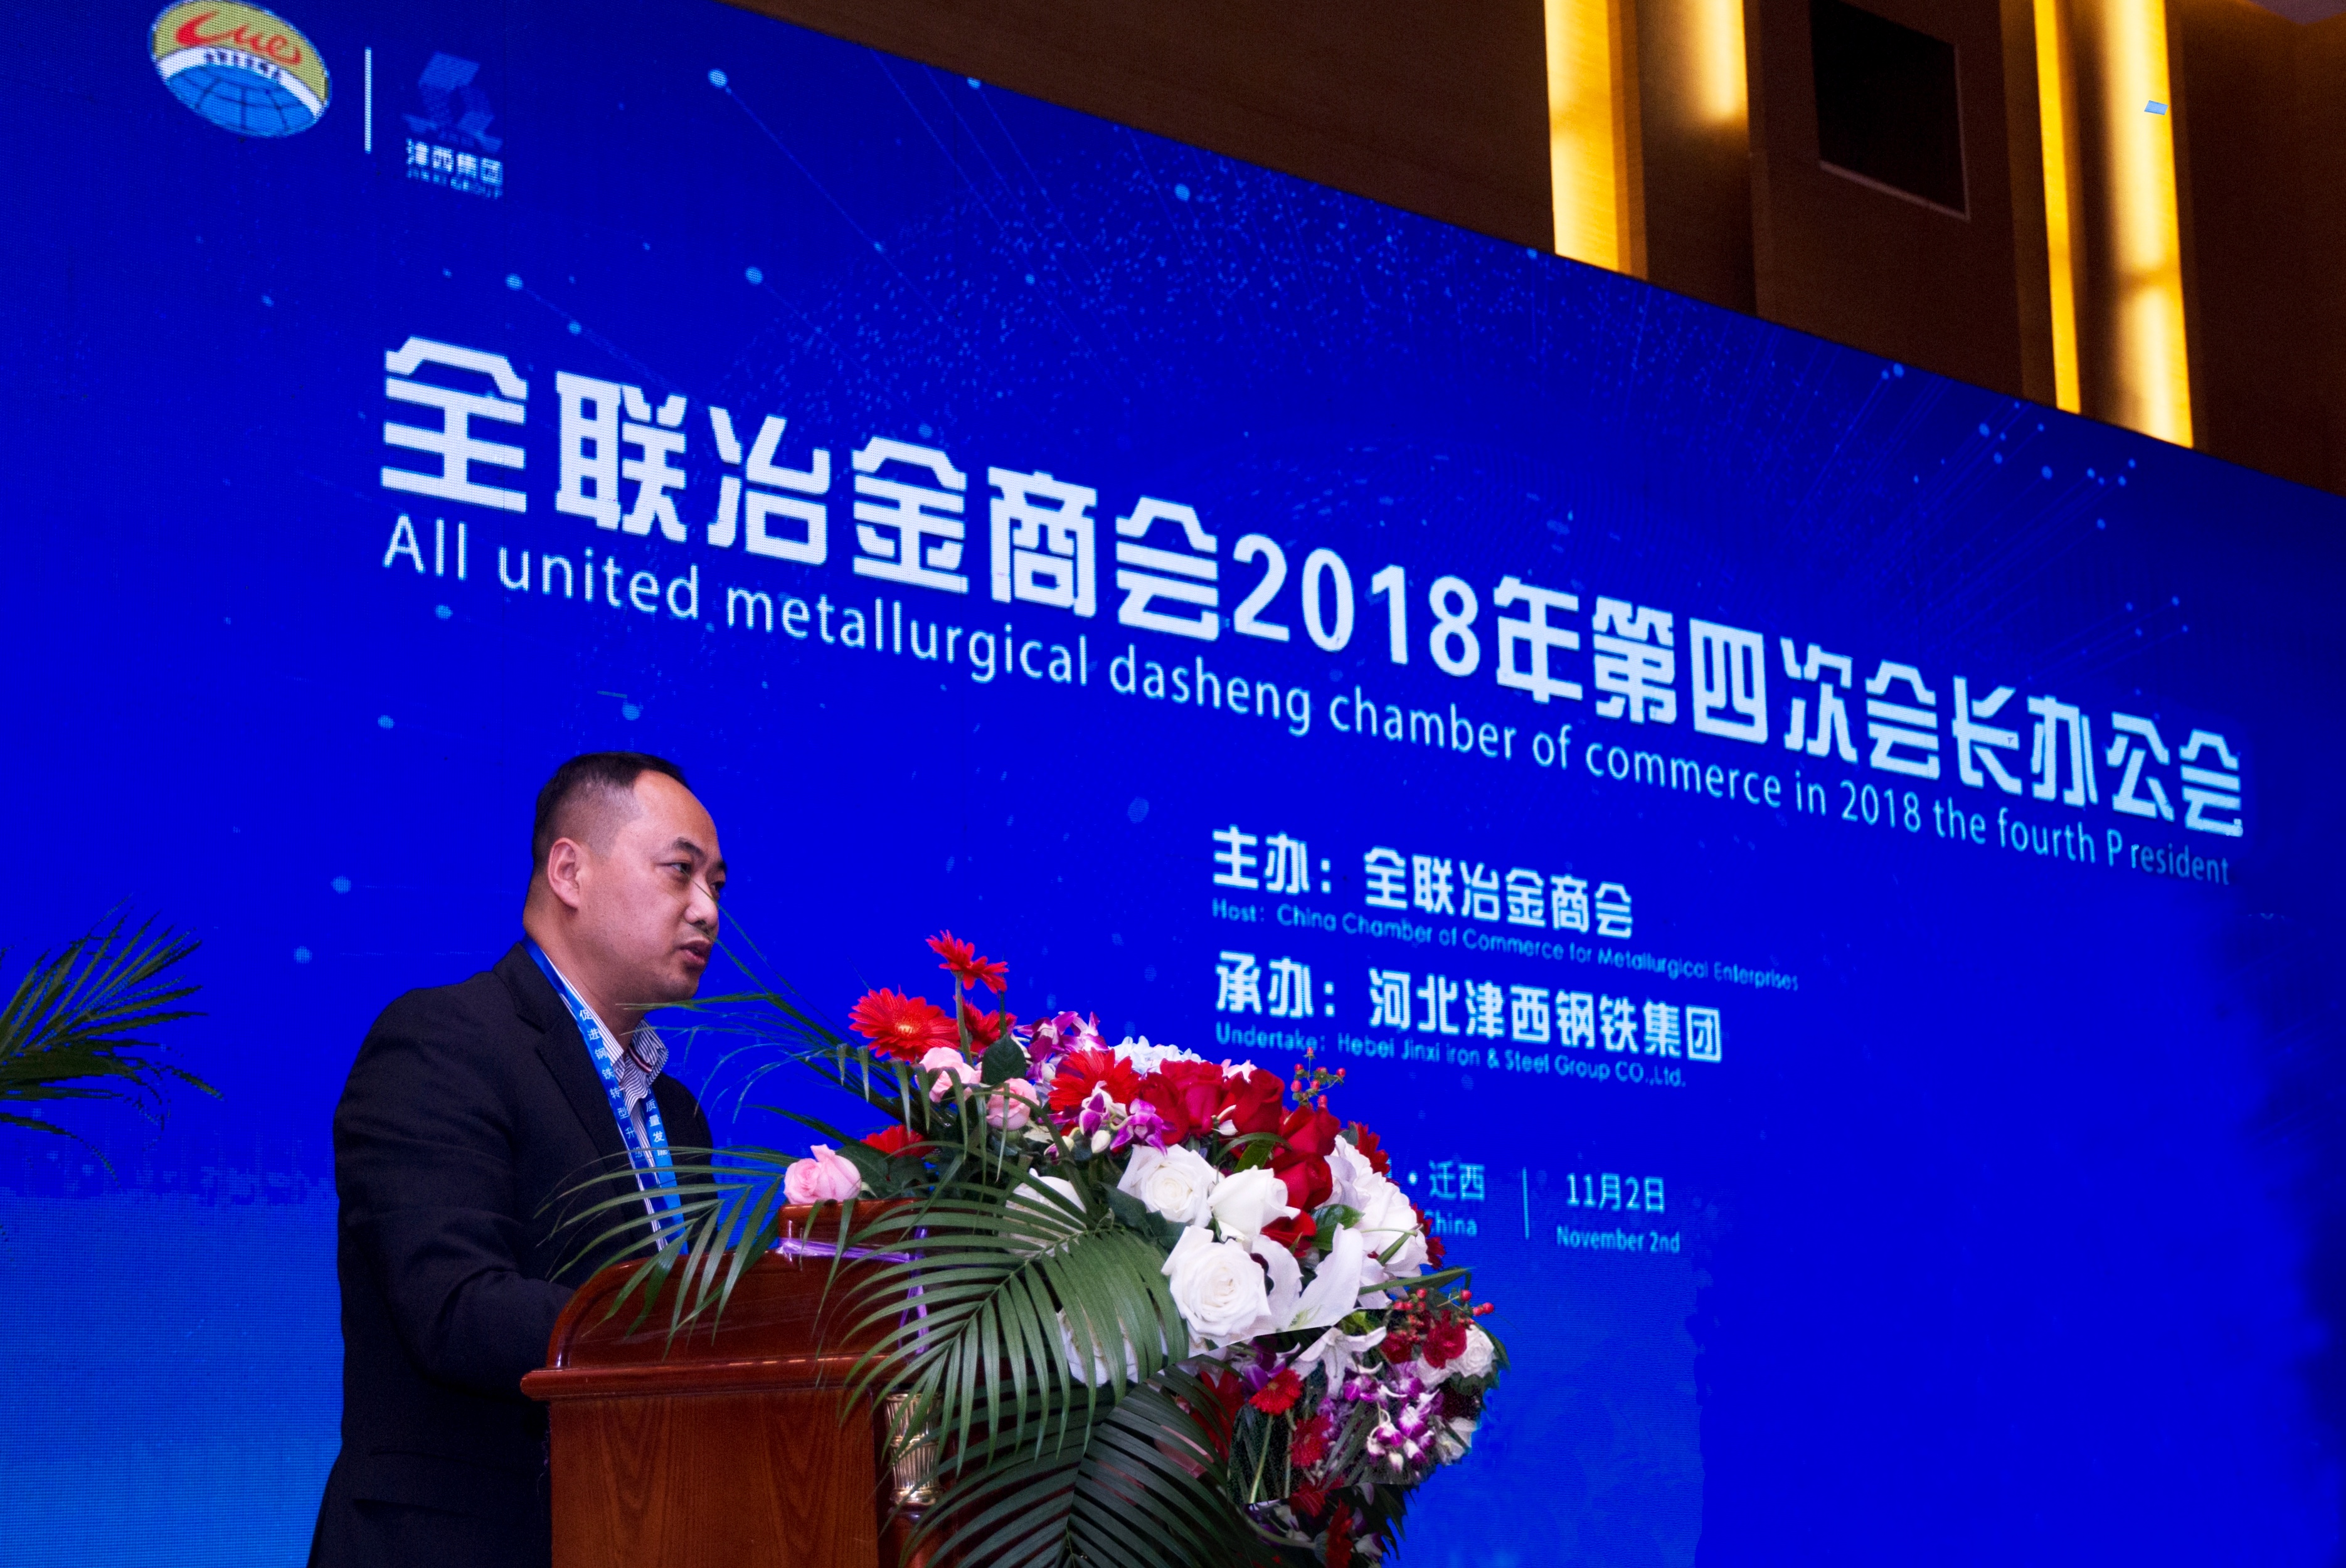 CHINA METALLURGICAL COMMERCE ASSOCIATION HOLD THE 2018 4TH MEETING  IN JING XI HEBEI CHINA ON NOVERMBER 3,2018.